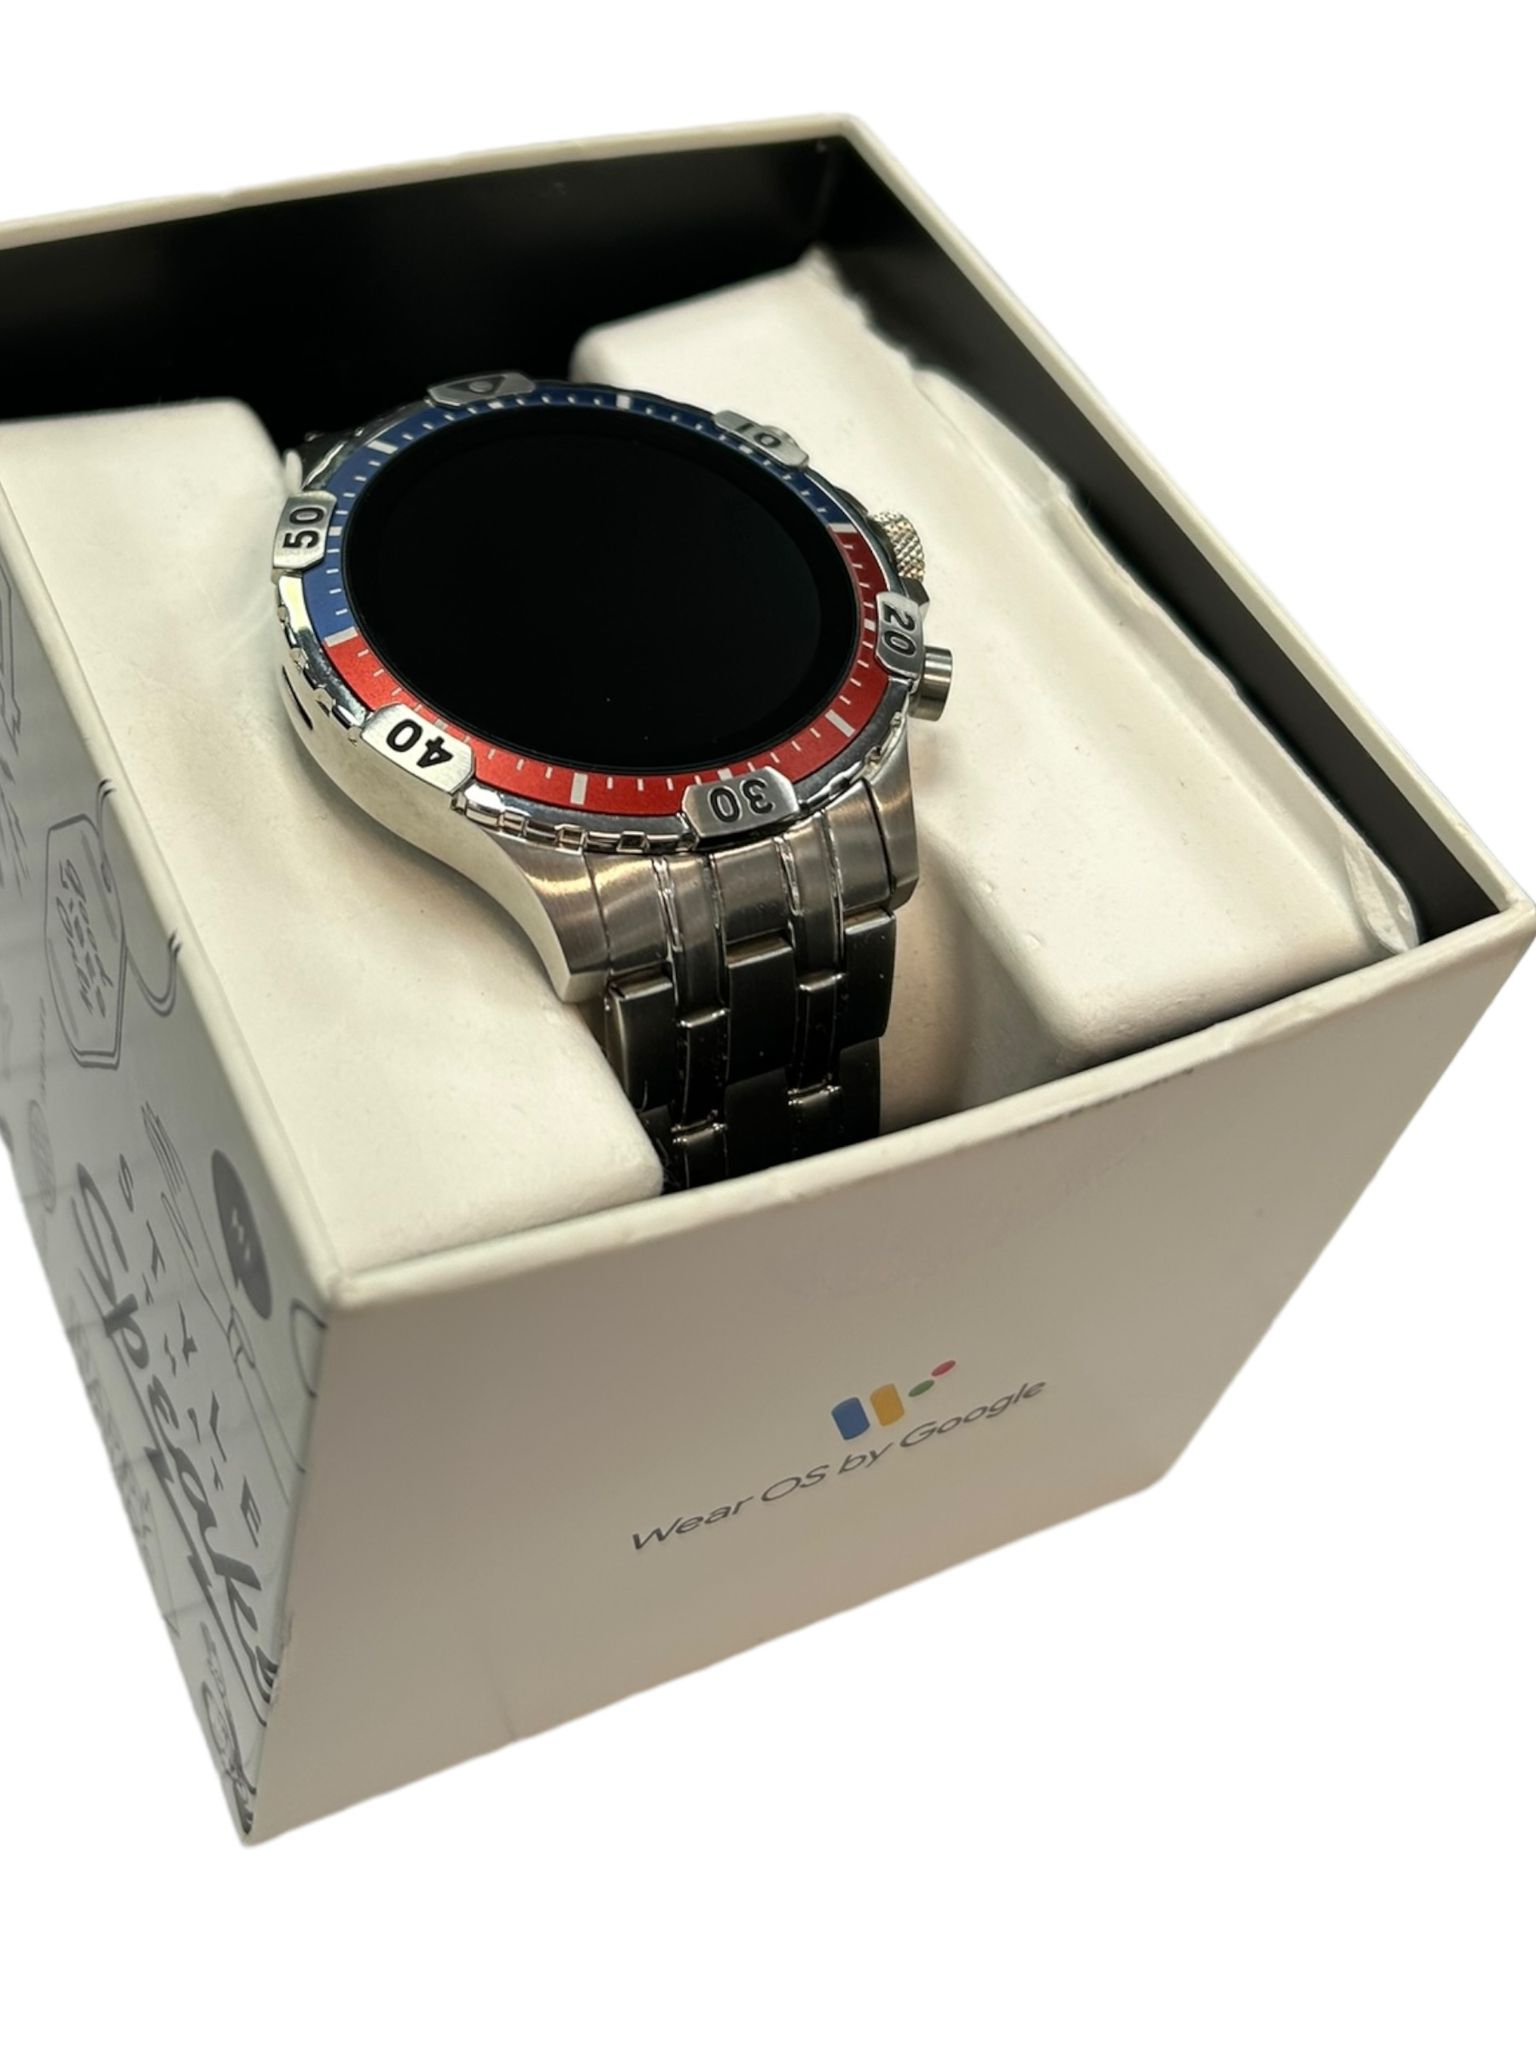 Fossil OS Watch - Boxed